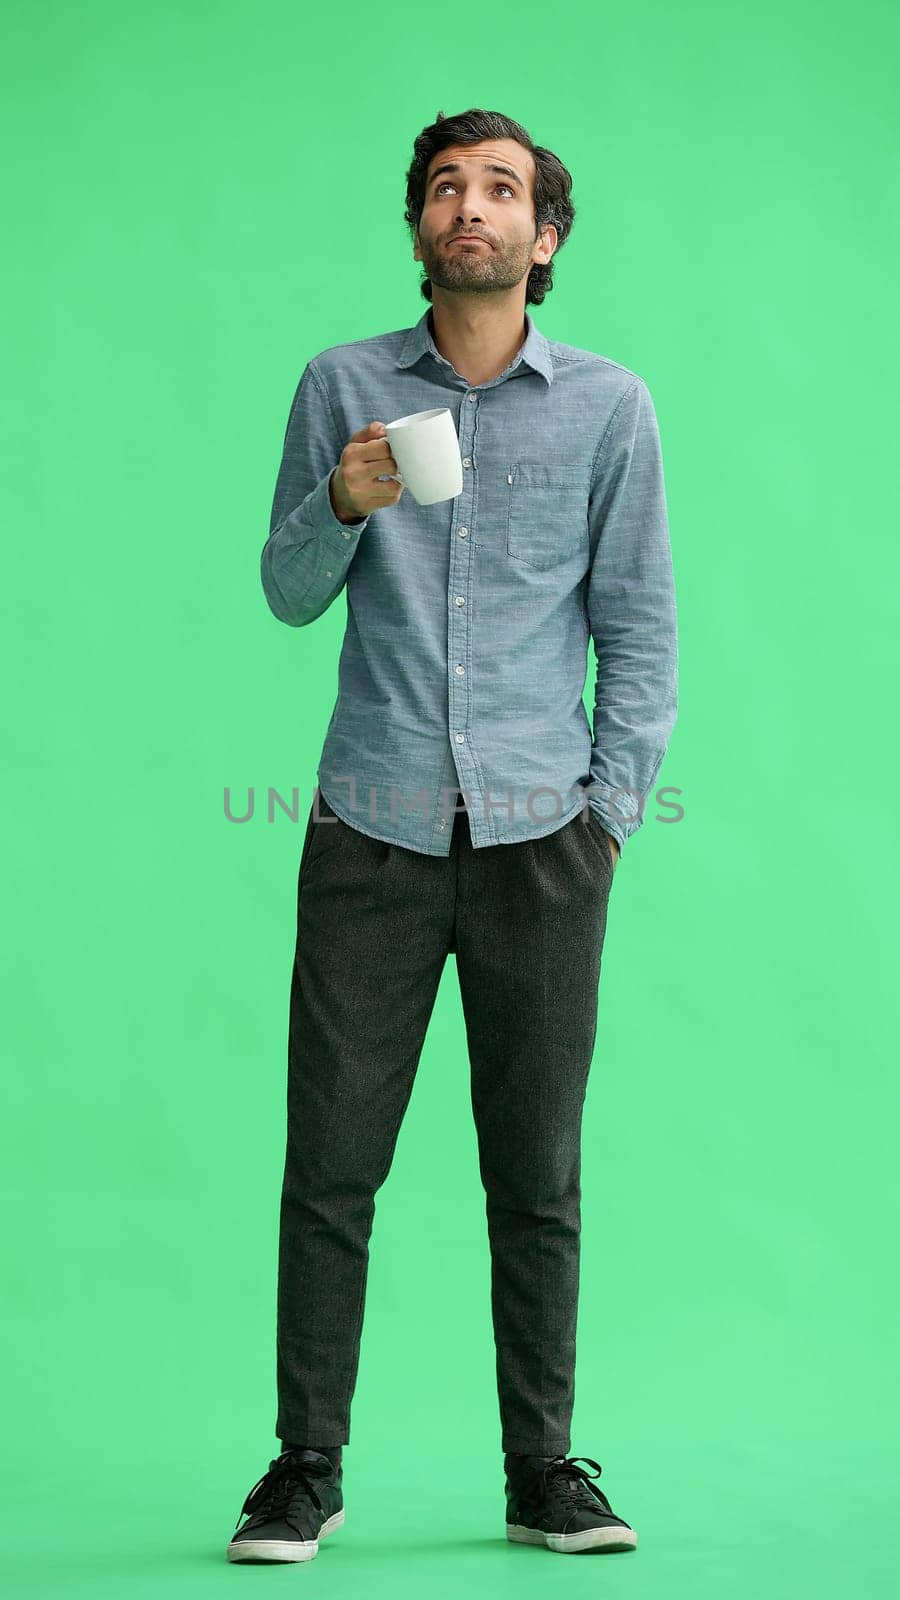 young man in full growth. isolated on green background. holding a mug of coffee.